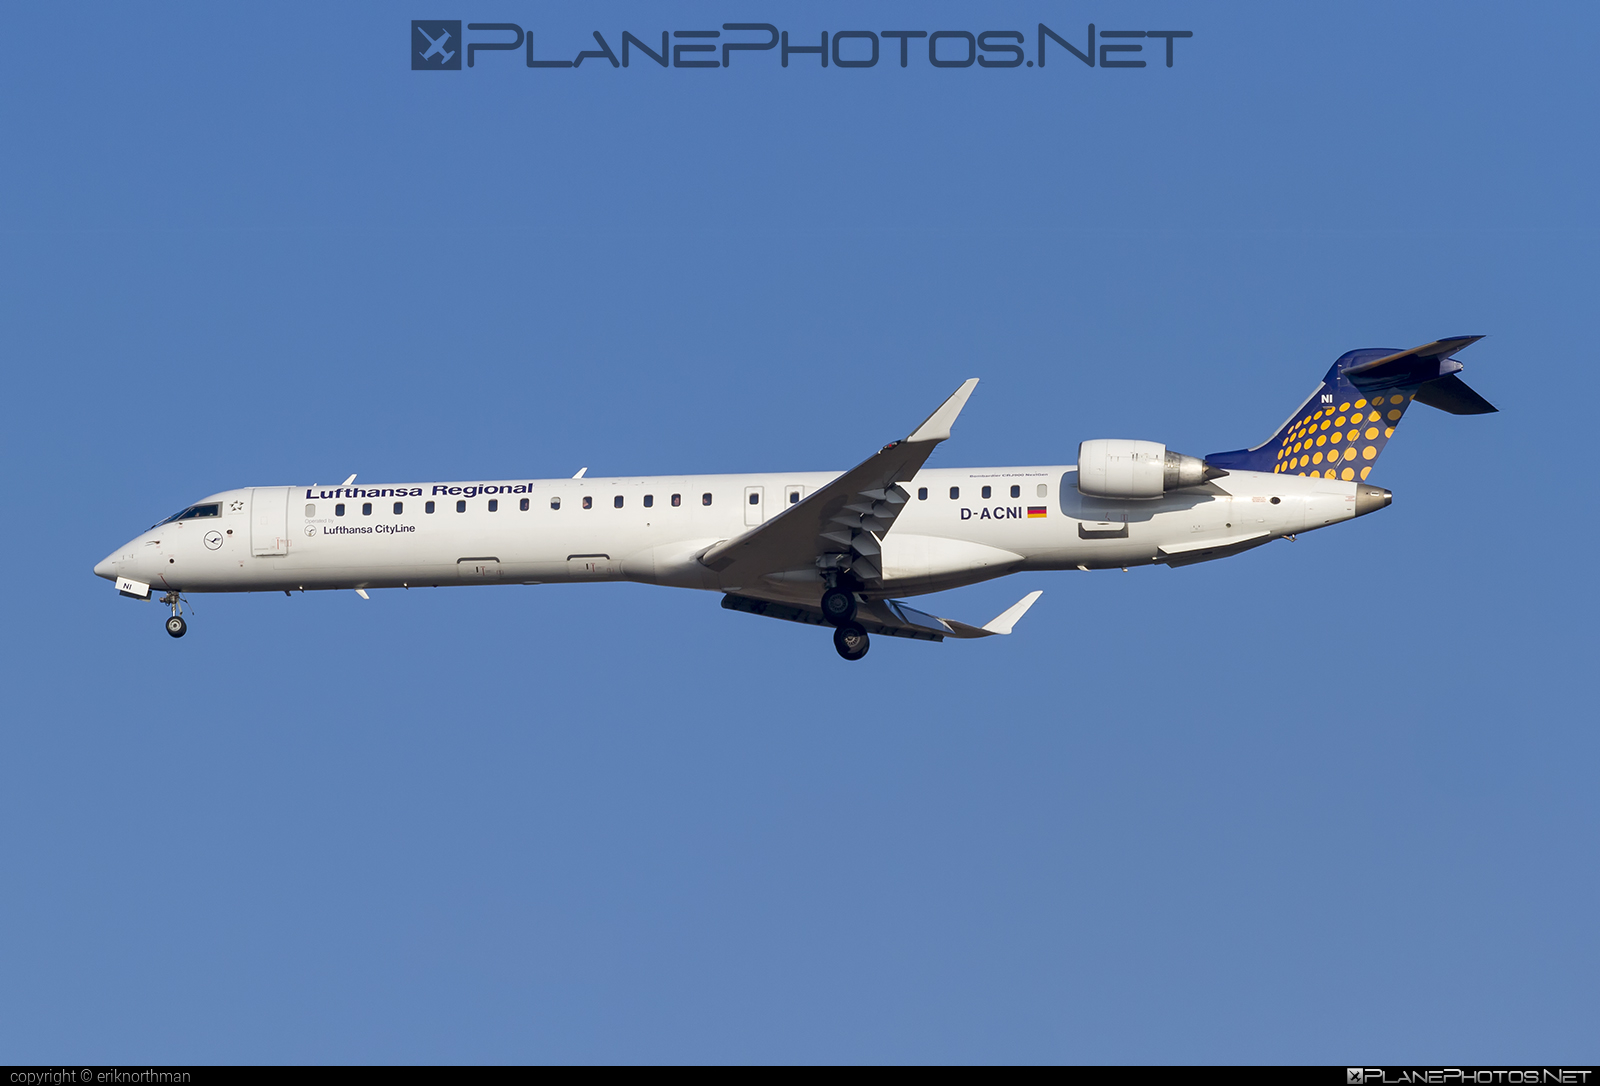 Bombardier CRJ900LR - D-ACNI operated by Lufthansa CityLine #bombardier #crj900 #crj900lr #lufthansa #lufthansacityline